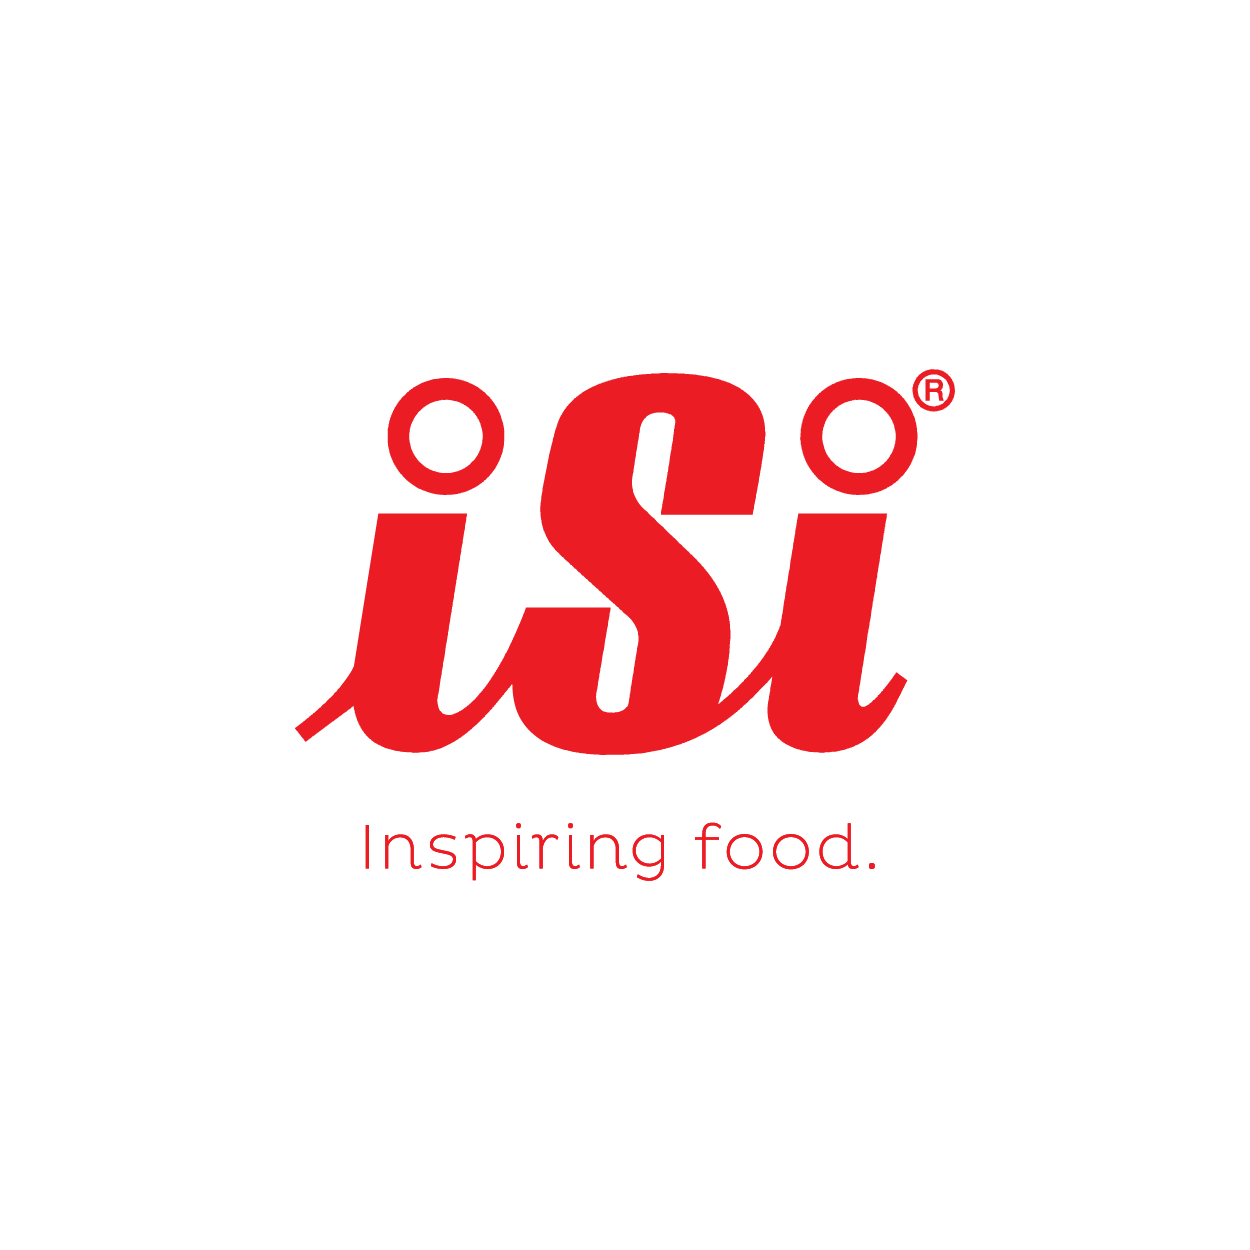 iSi